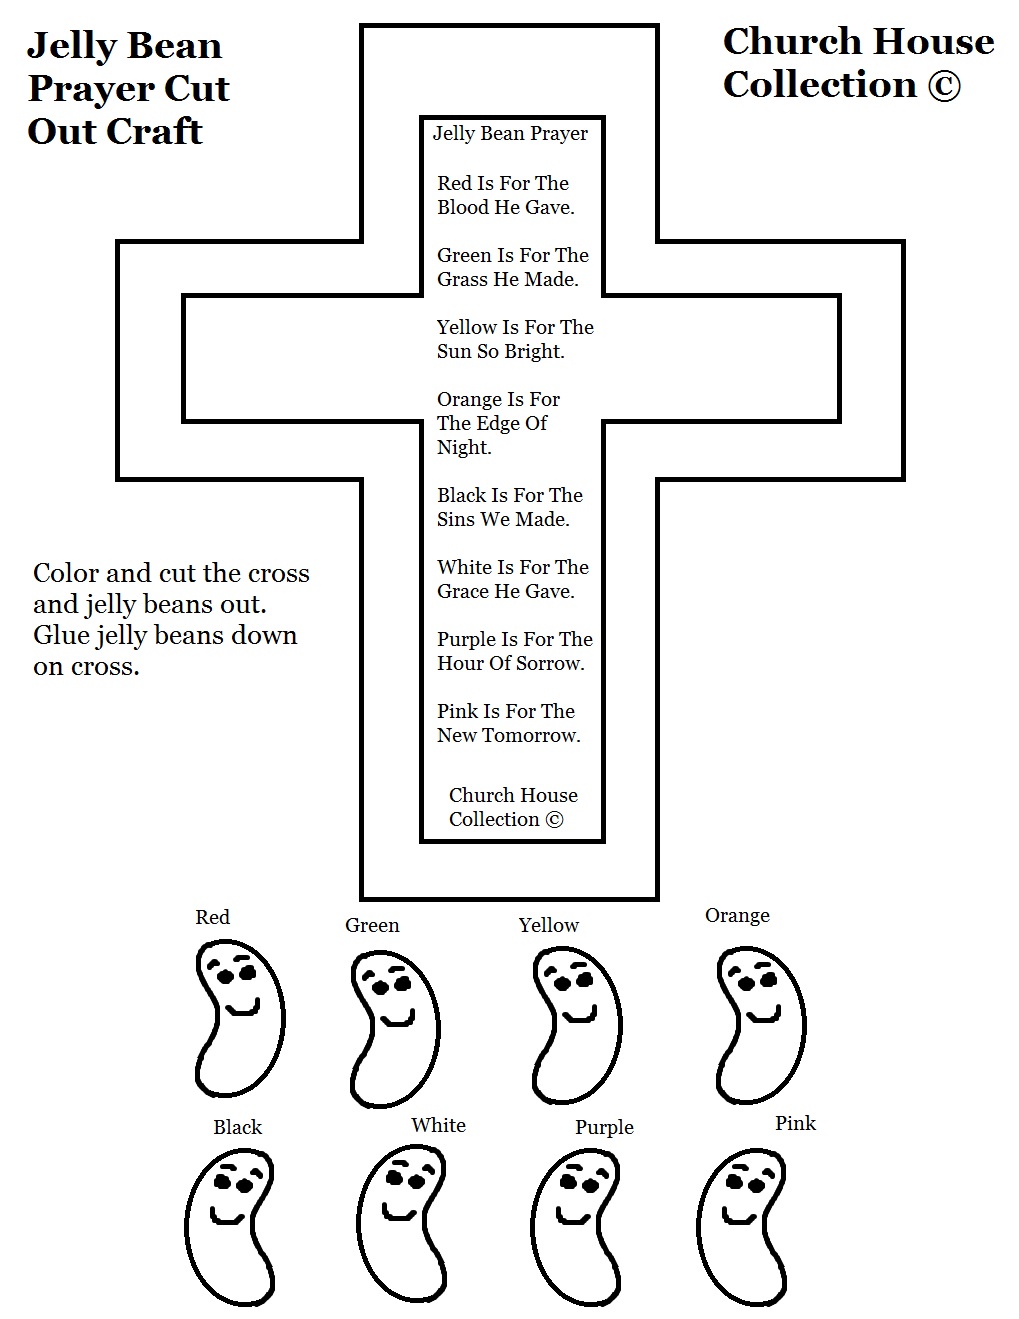 Download Church House Collection Blog: Jelly Bean Prayer Cross Cut Out Plant Stake Craft